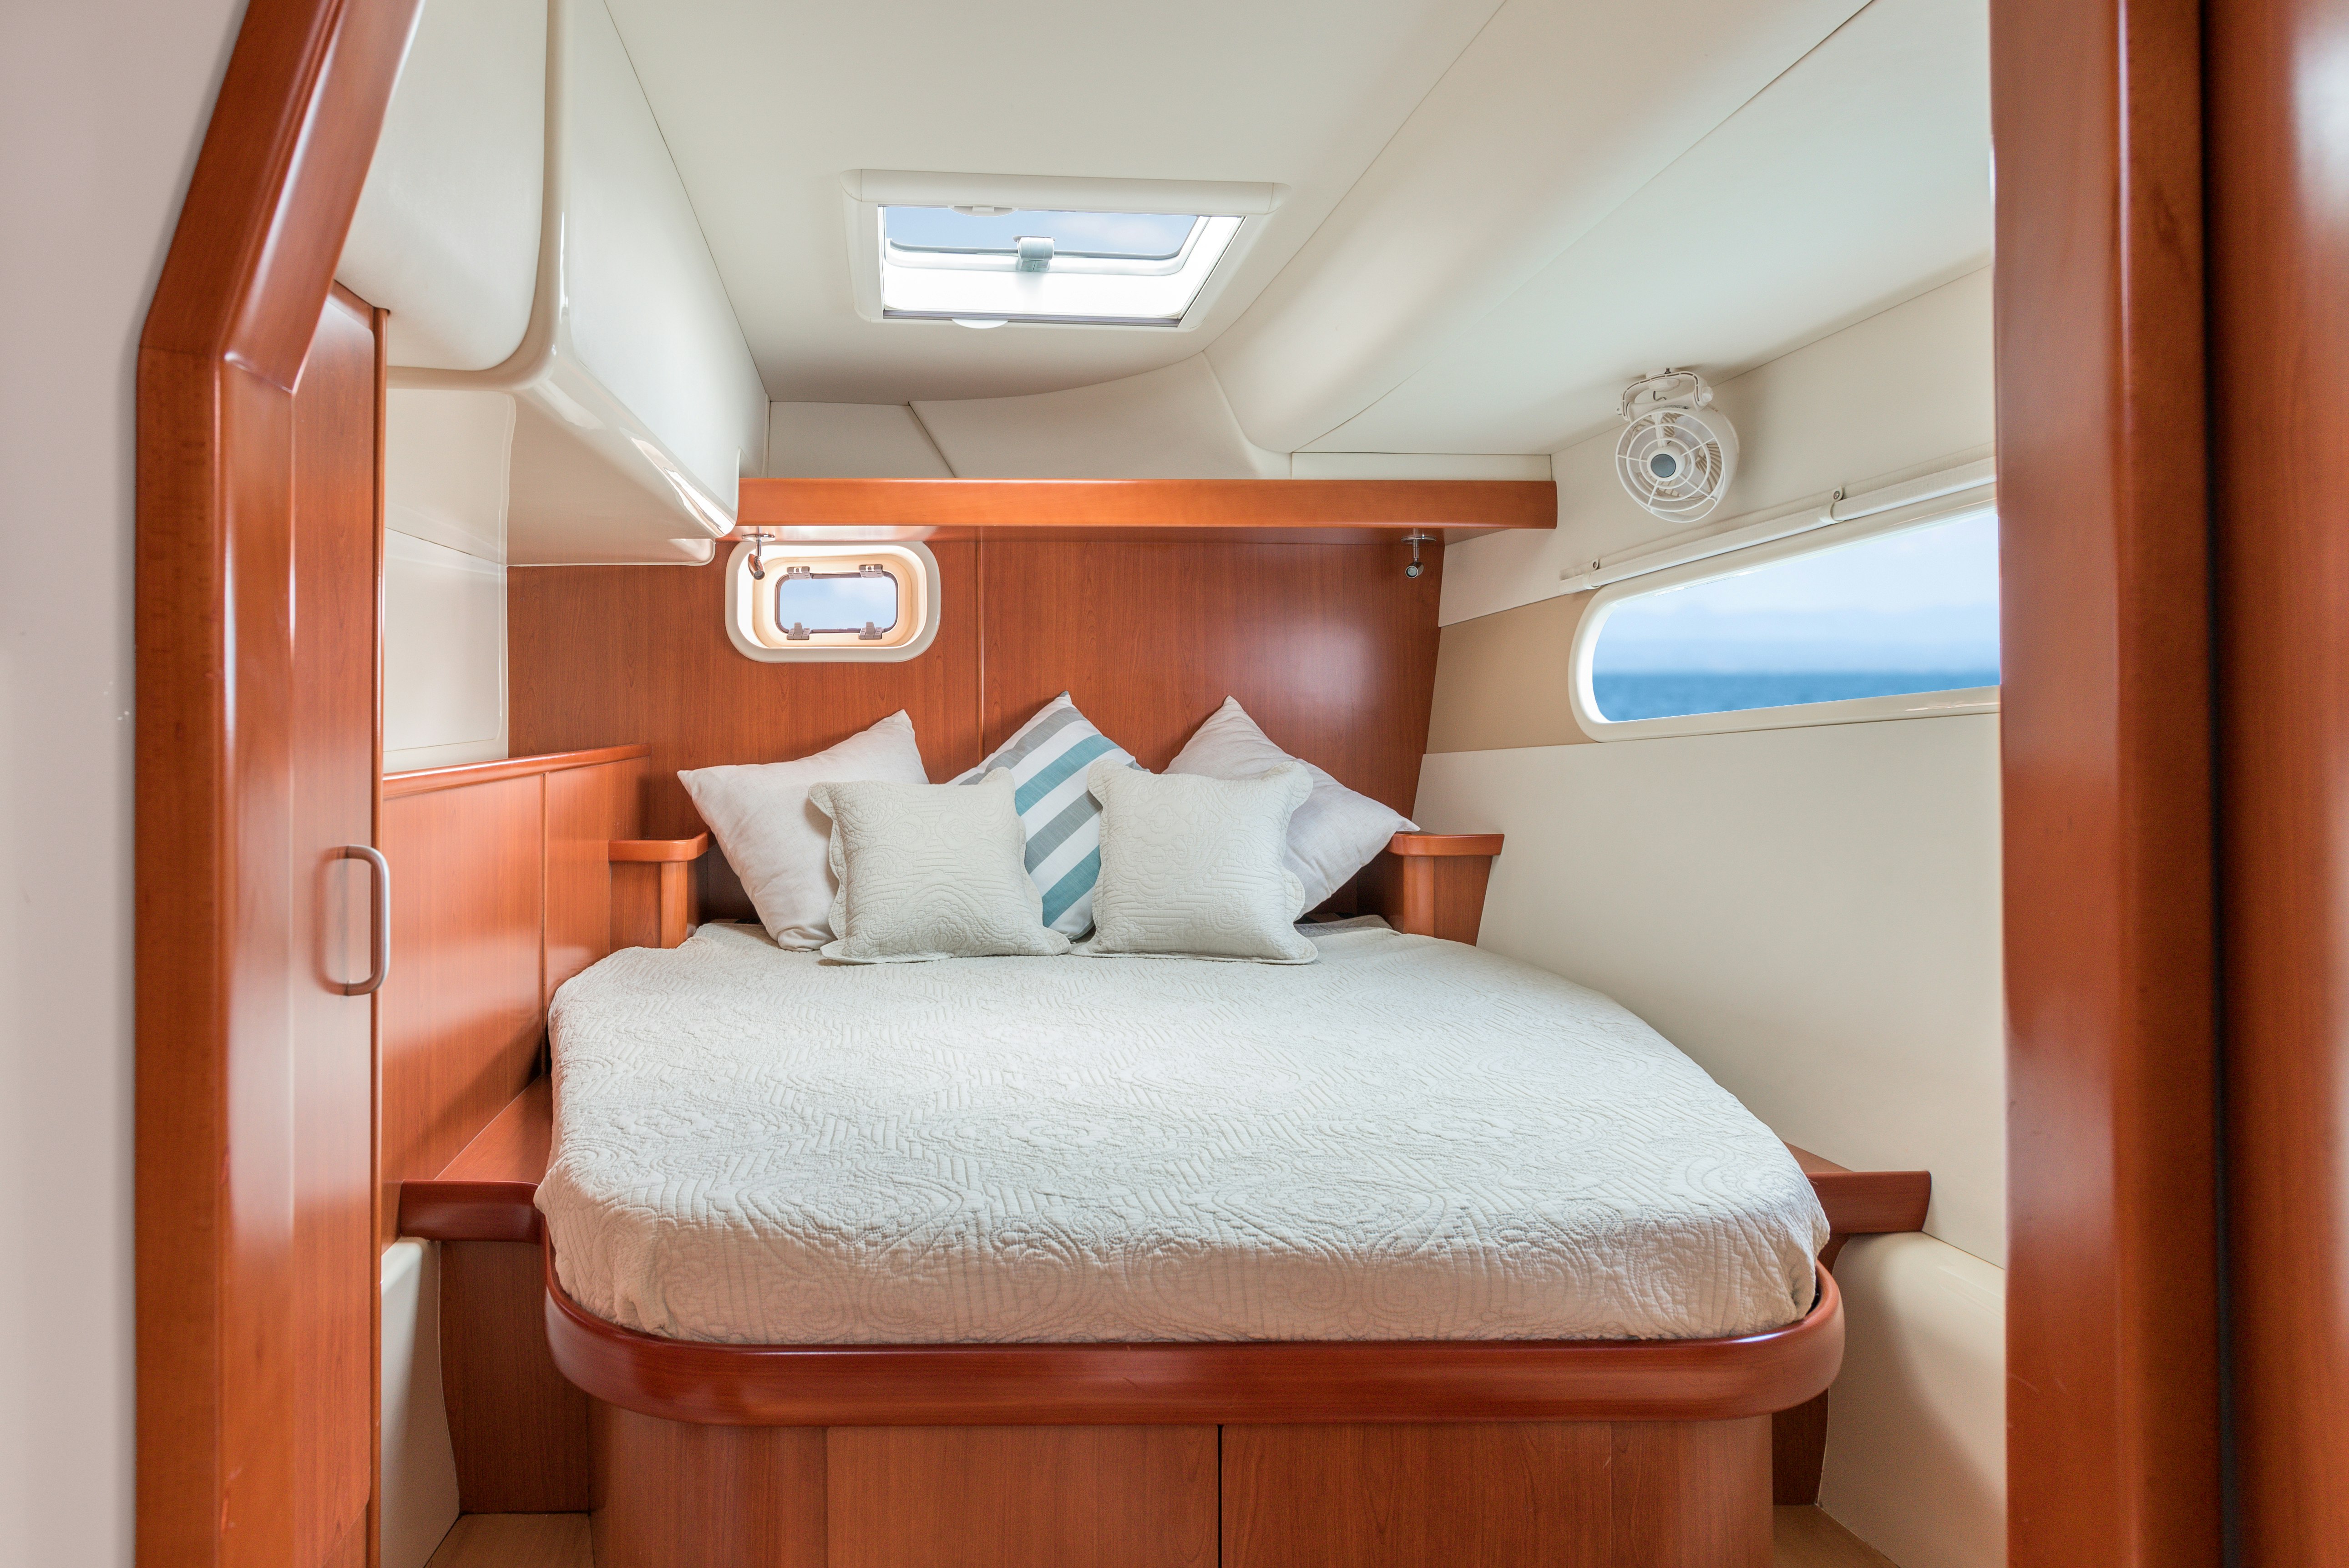 Sleeping bedroomberth on private sailing catamaran with white and blue cushions, white bedding and with Mediterranean sea view through the port light